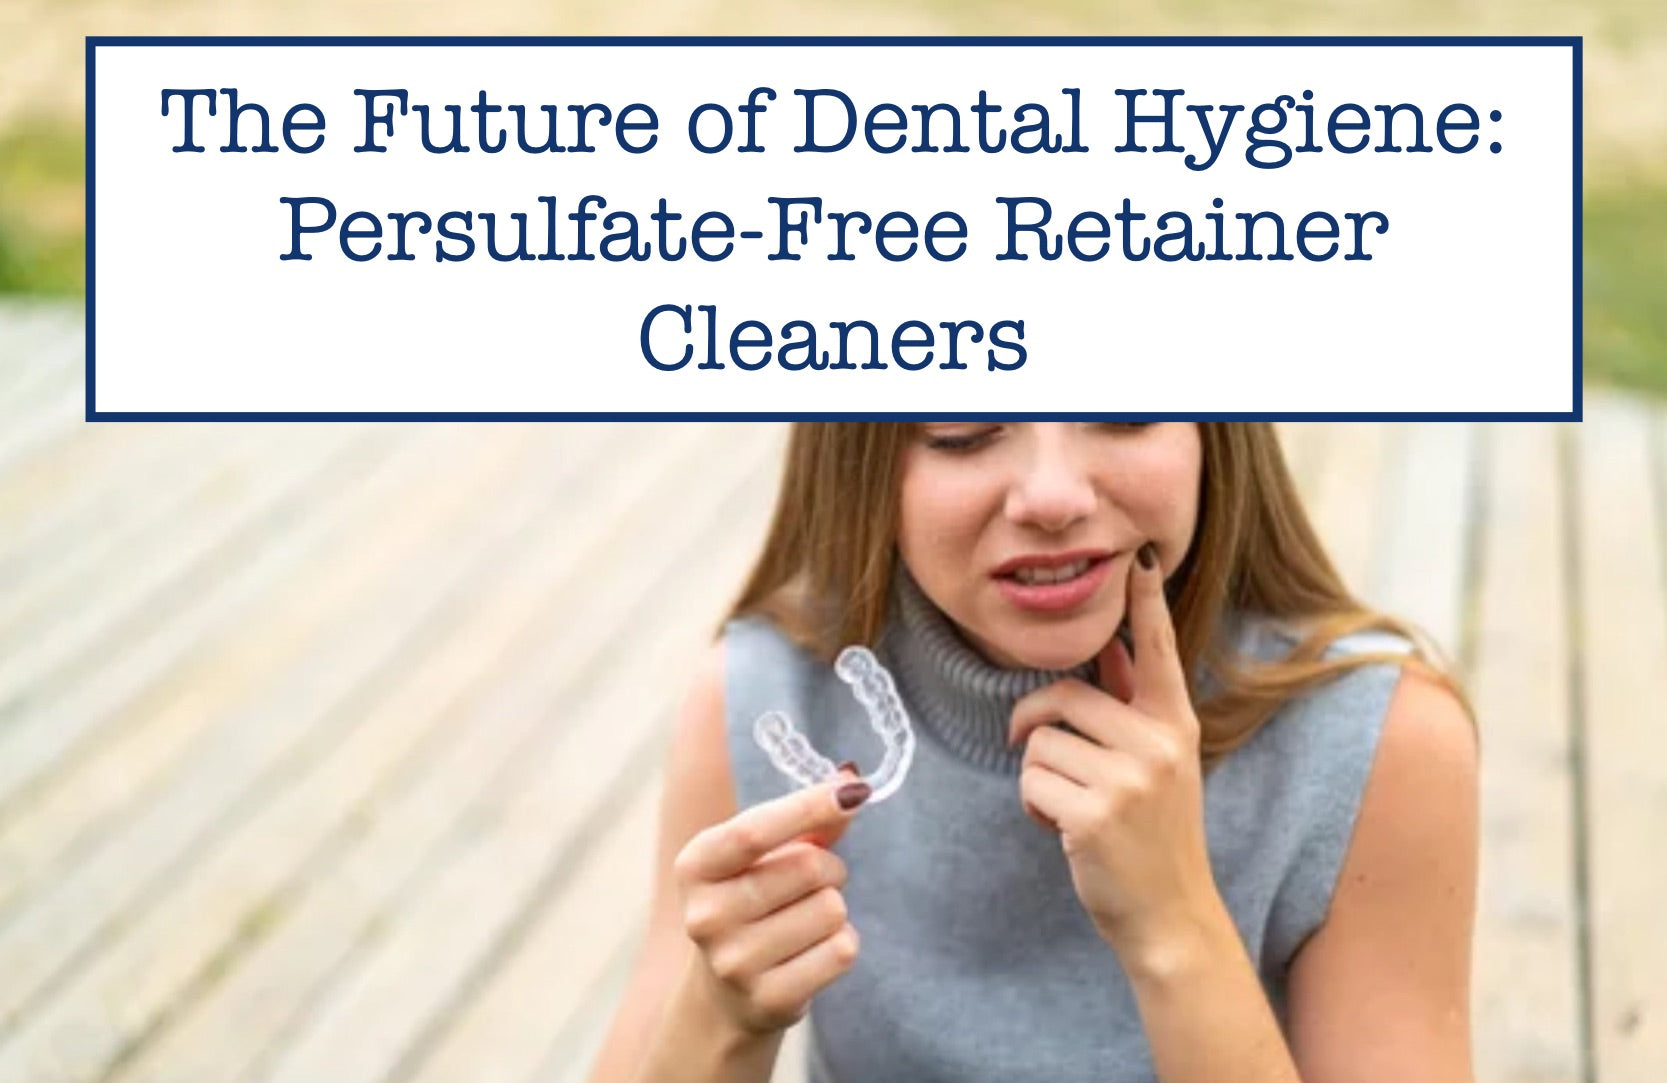 The Future of Dental Hygiene: Persulfate-Free Retainer Cleaners